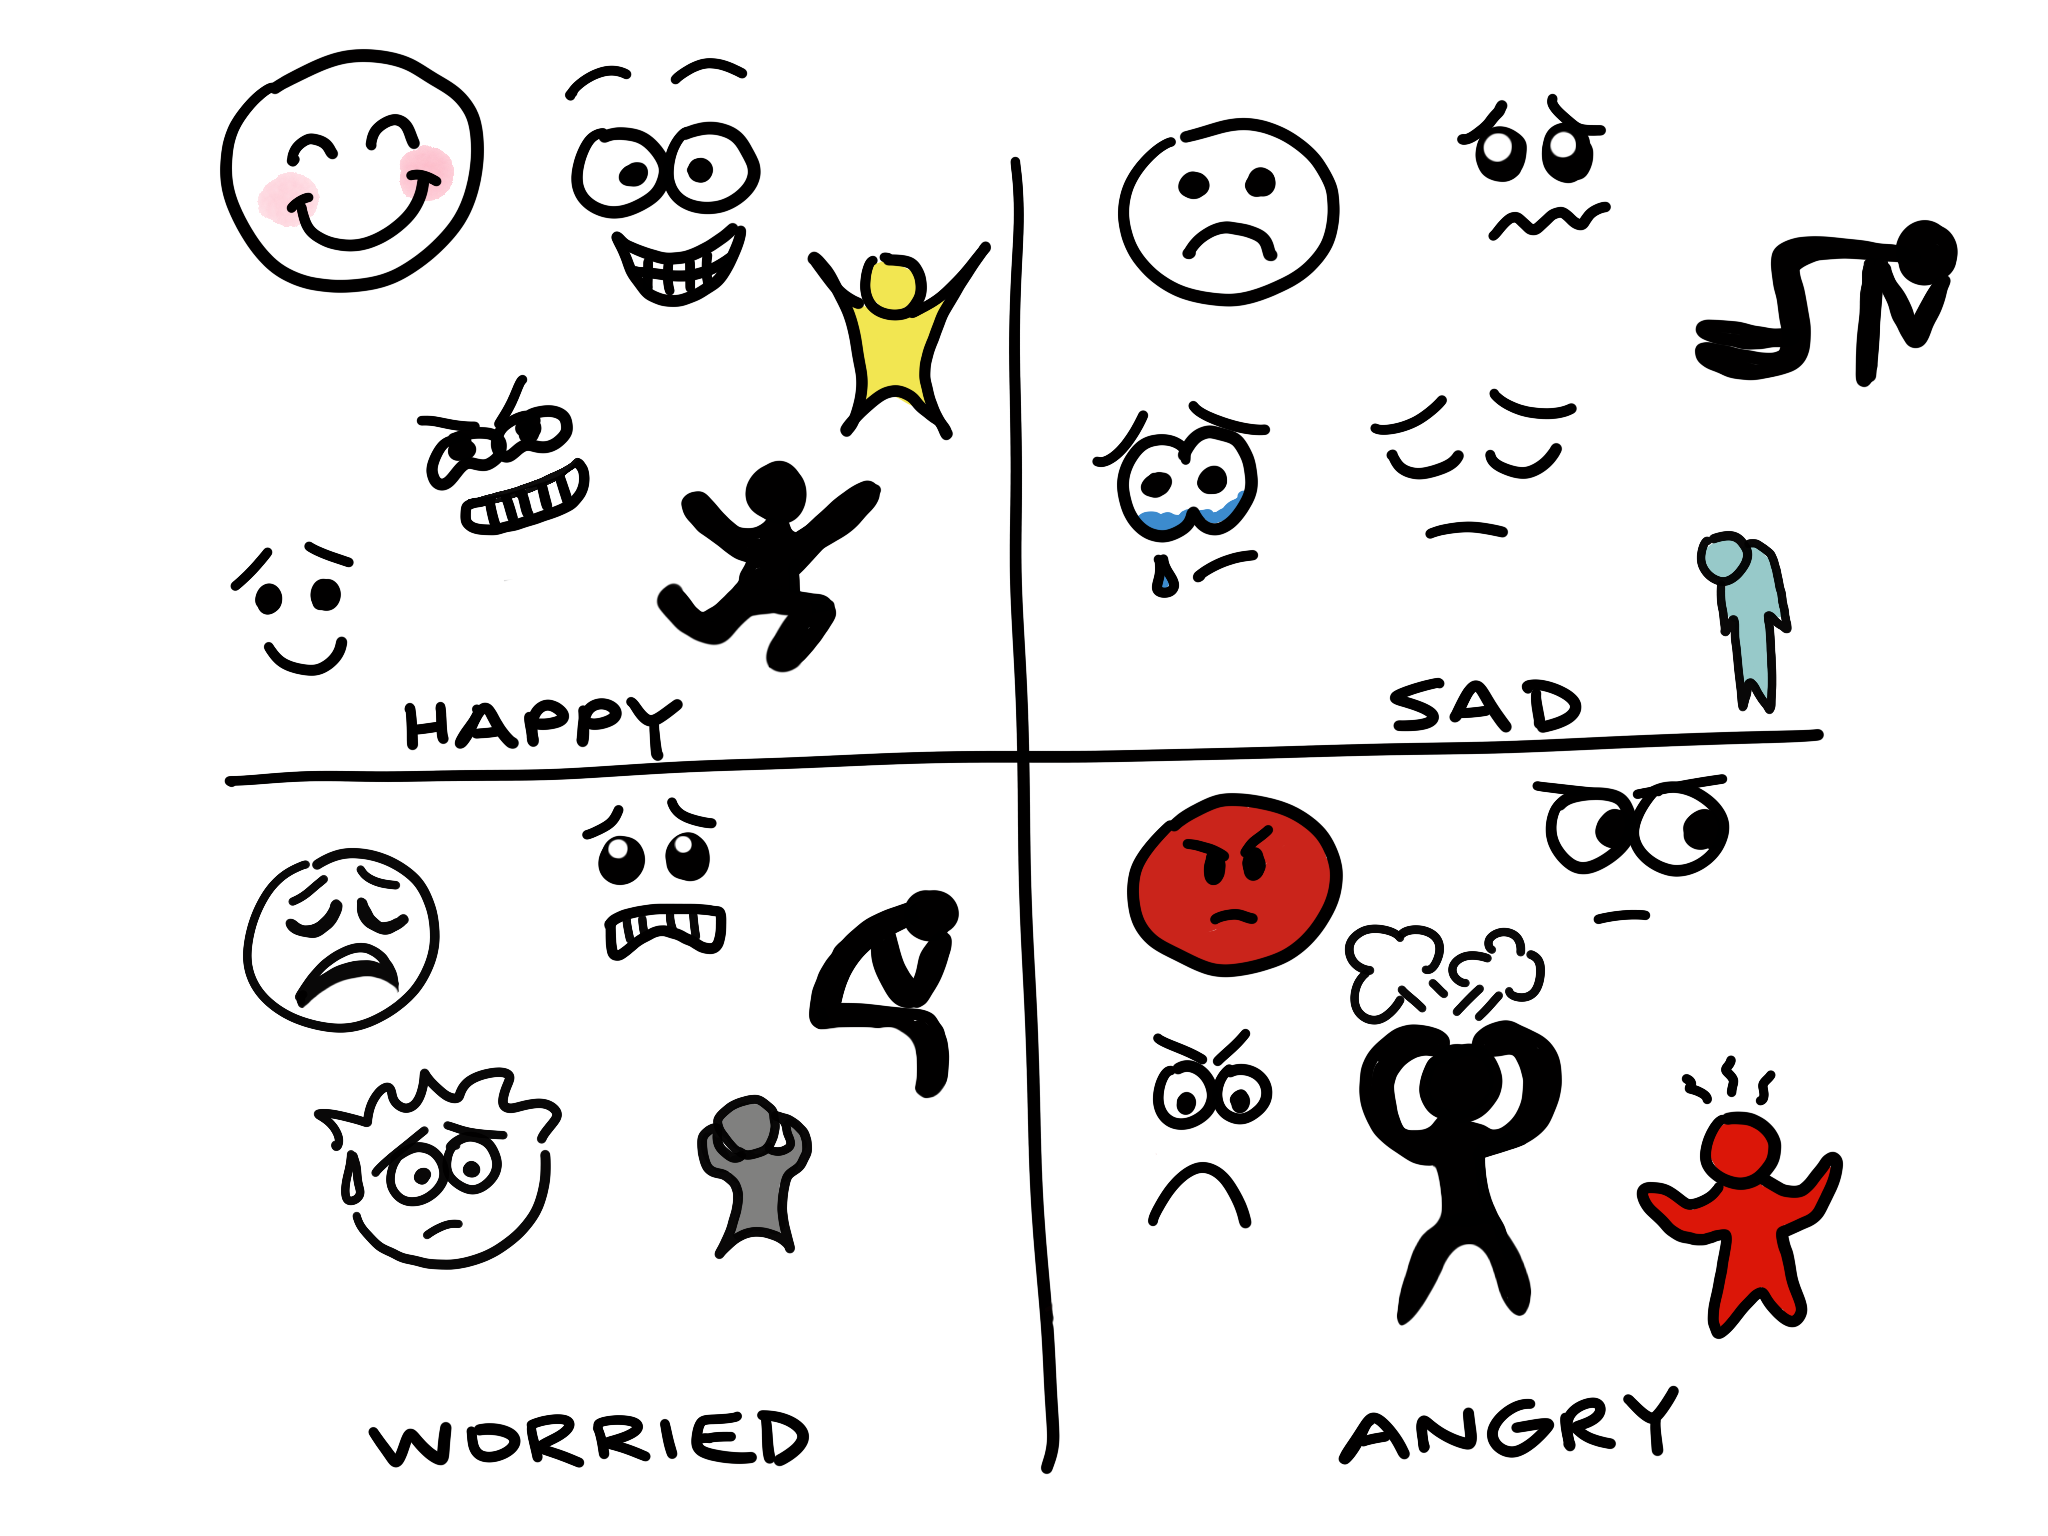 Have students divide their page up into quadrants and choose 4 emotions. Draw each emotion in as many ways as you can.